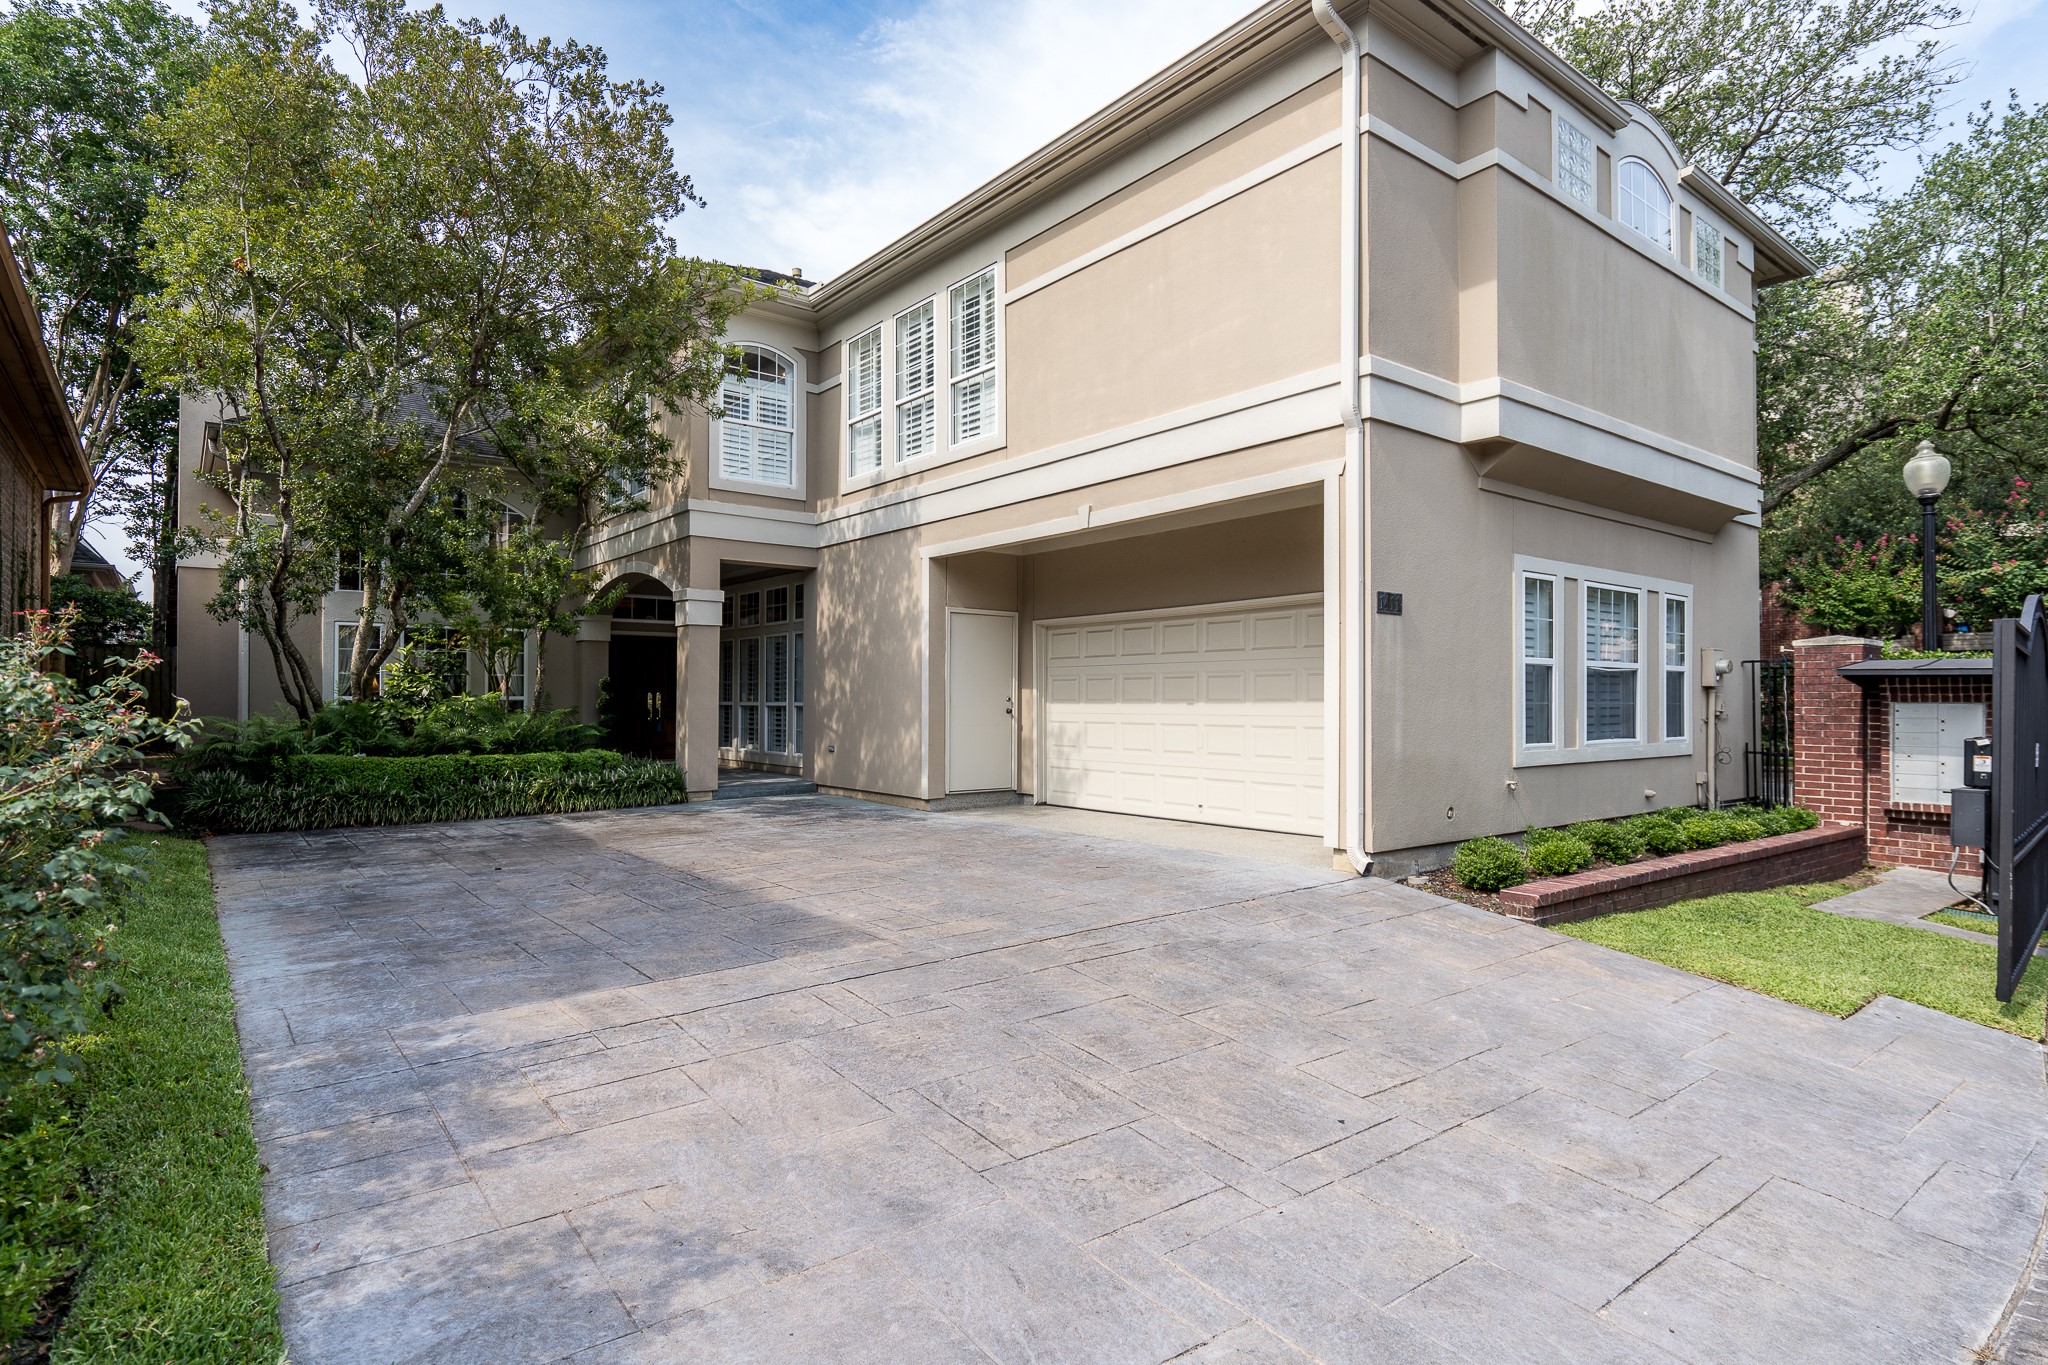 Great curb appeal! Plenty of driveway space for guests to park.